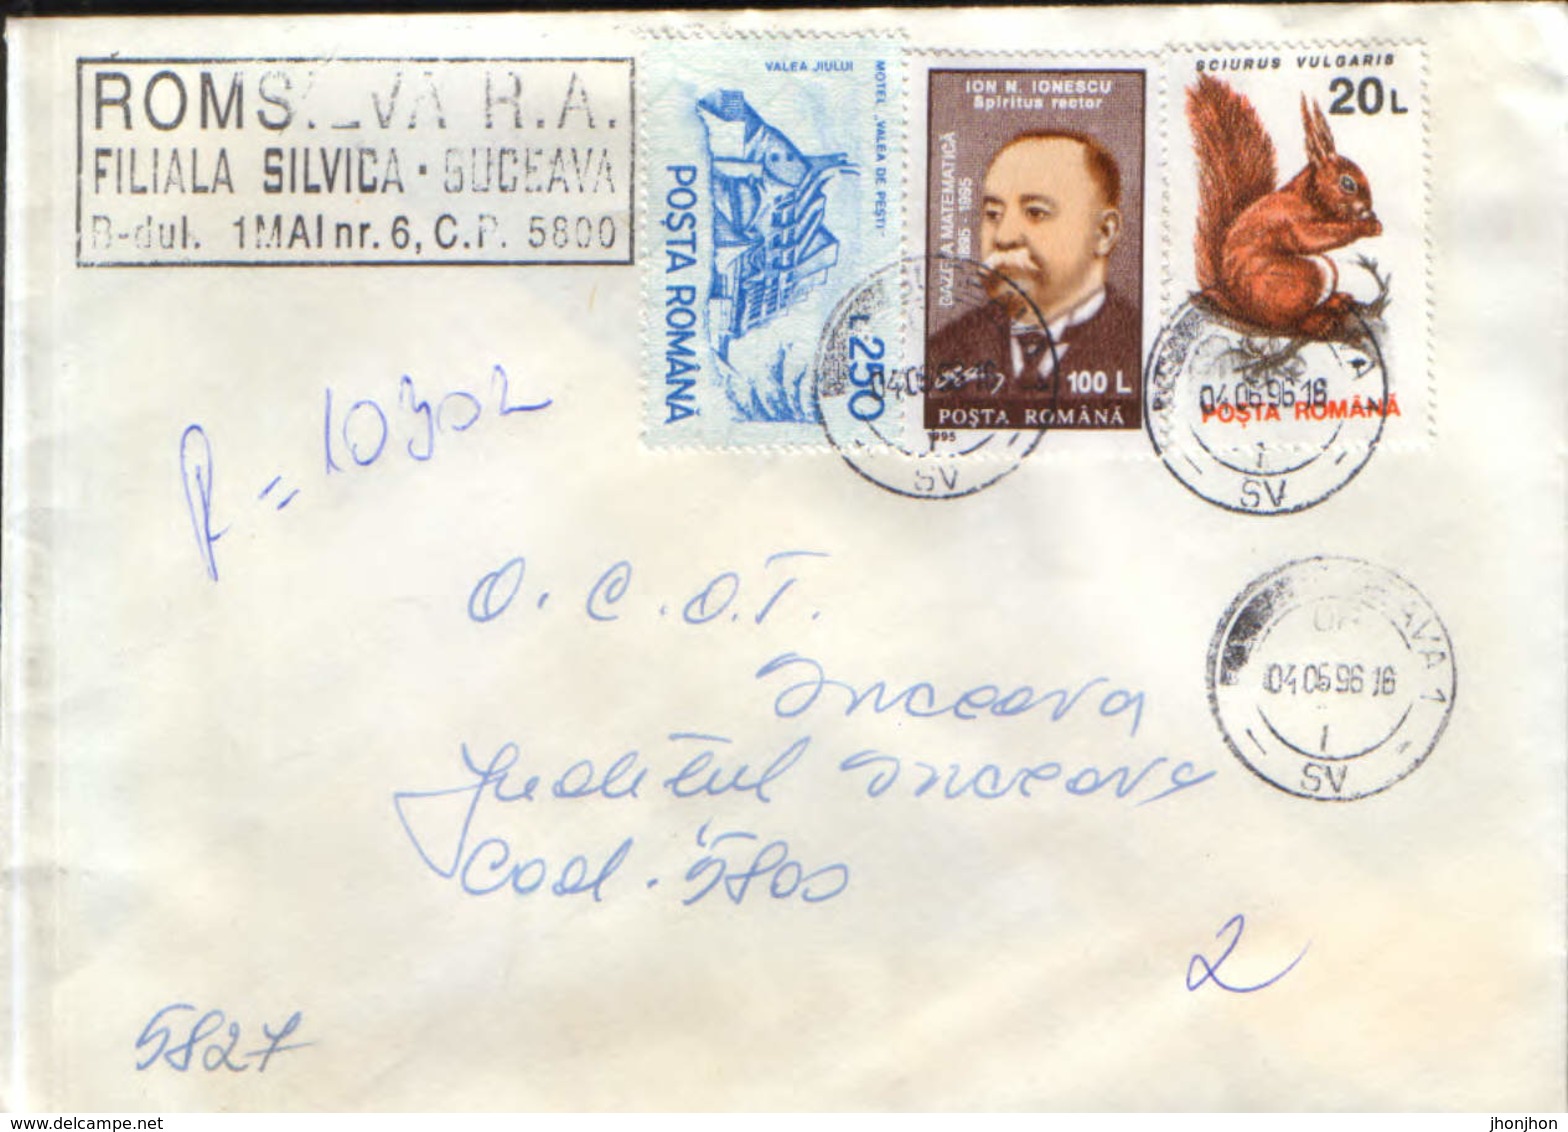 Romania - Registered Letter Circulated In 1996 - Covers & Documents